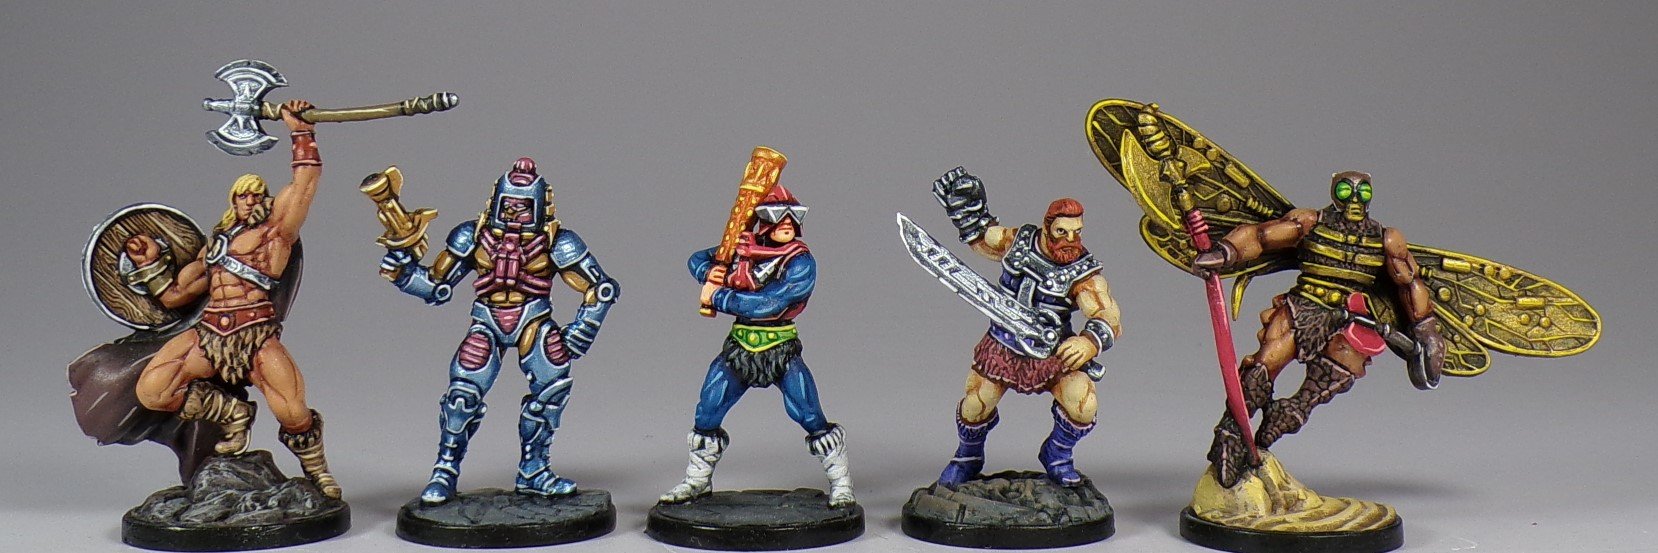 Paintedfigs Masters of the Universe Clash for Eternia miniature painting service (25).jpg